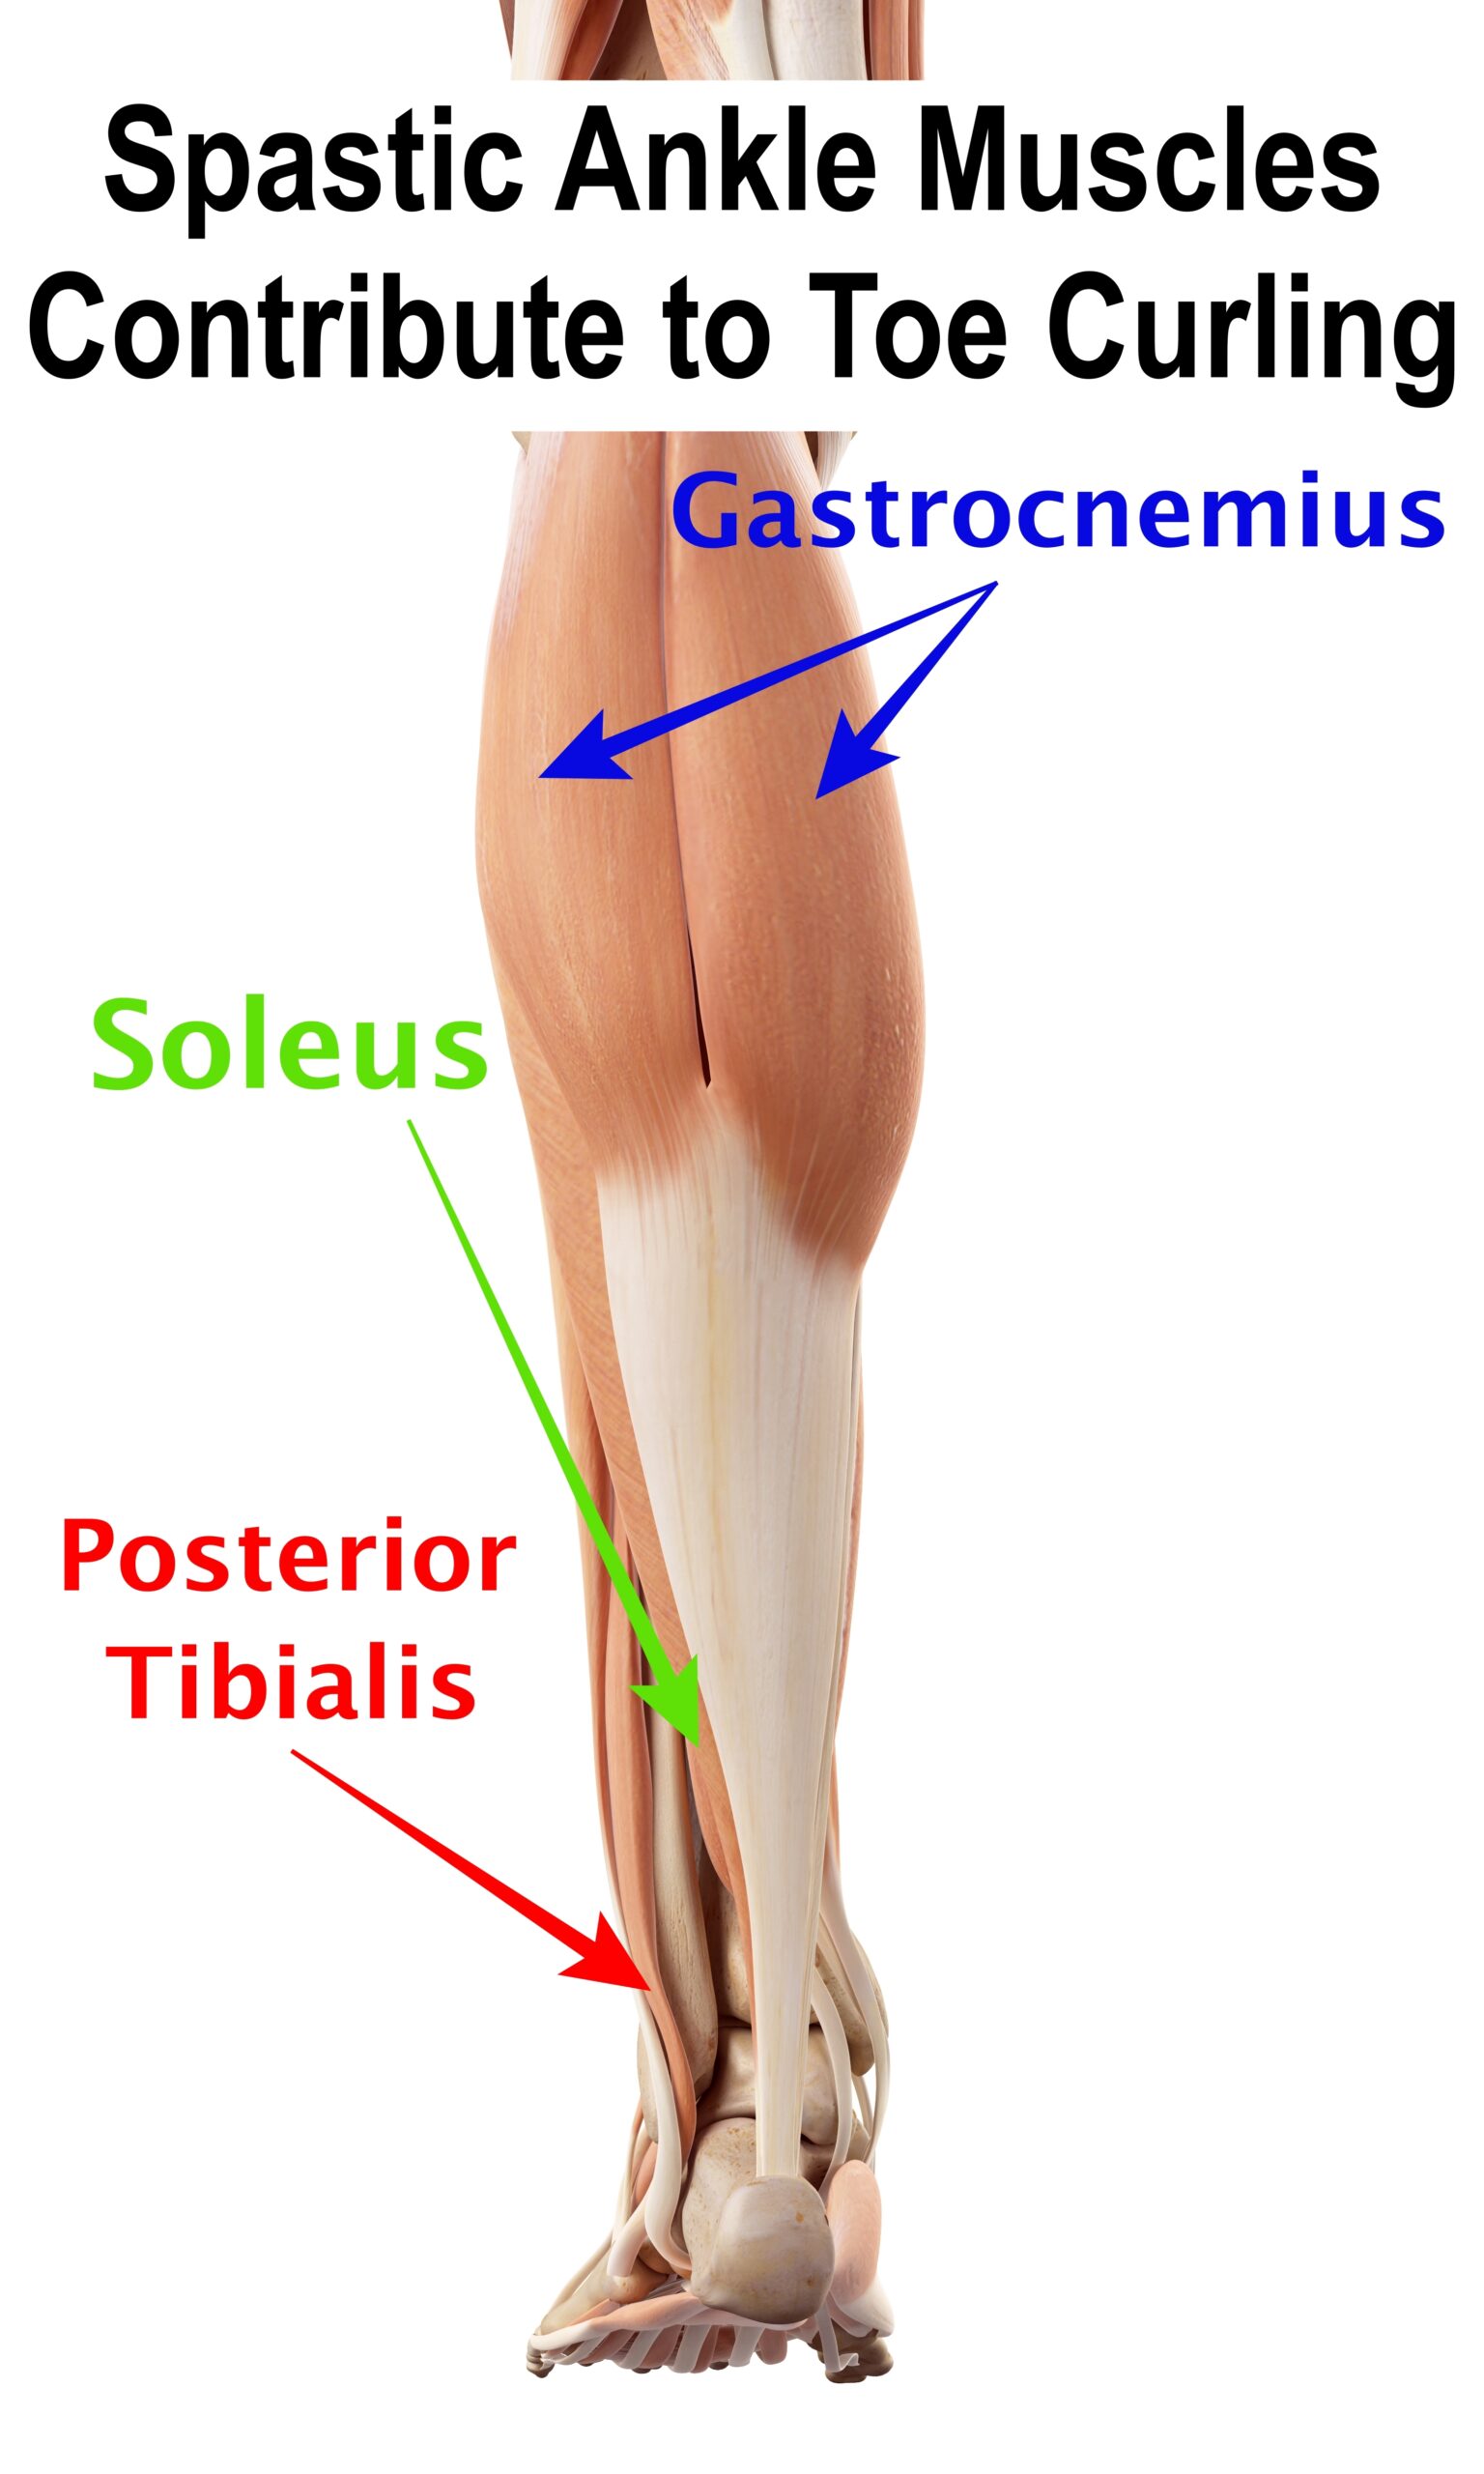 vector image of spastic ankle muscles that contribute to toe curling